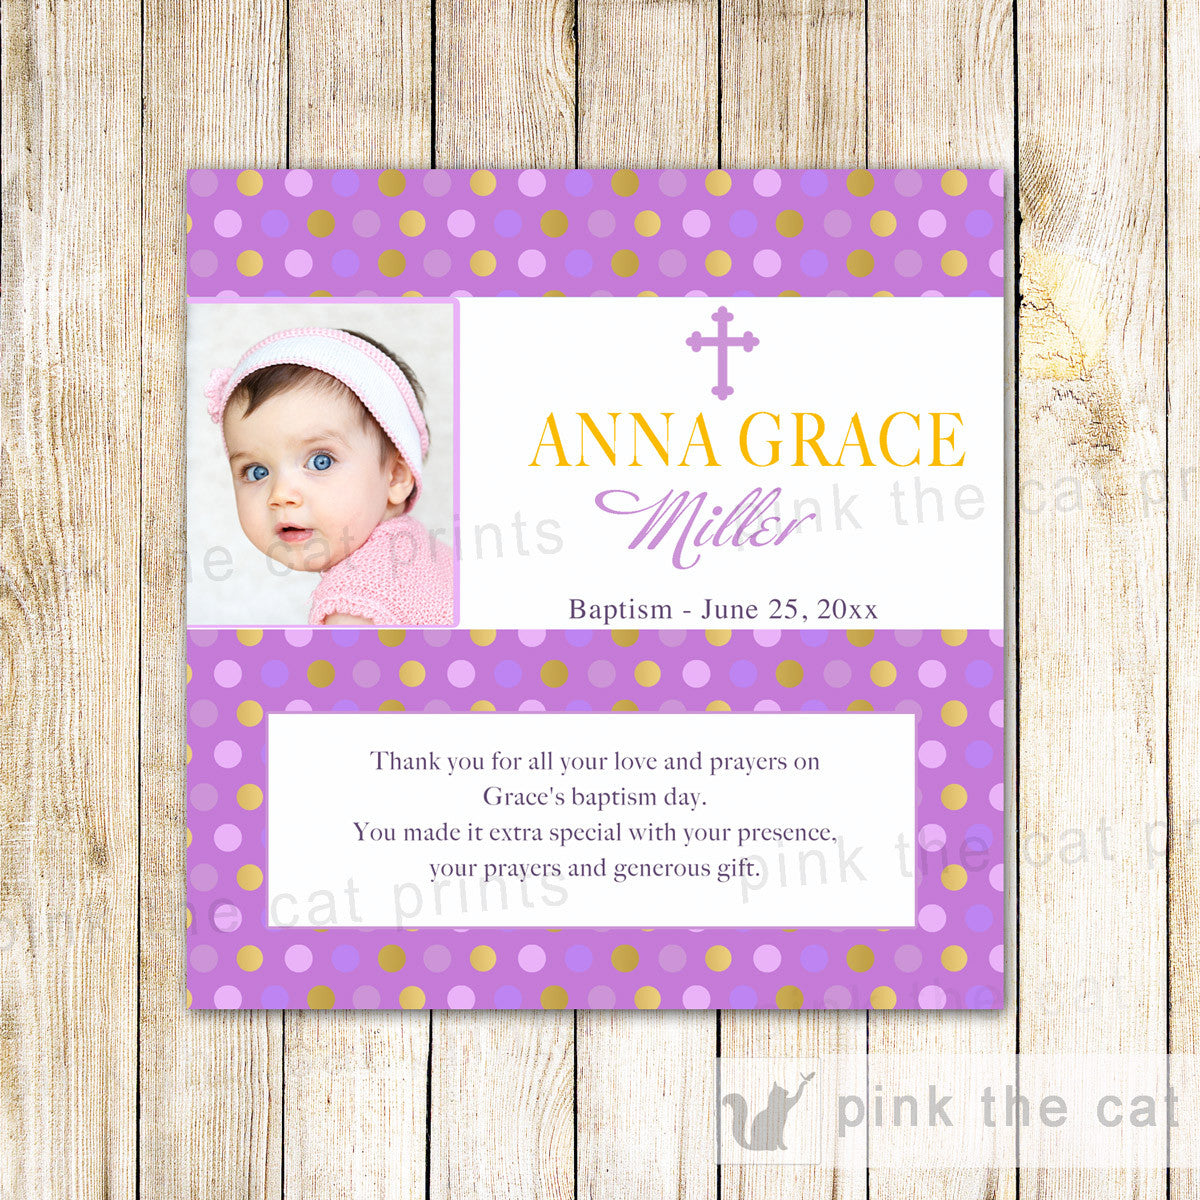 50 Candy Bar Wrappers Girl Baptism Christening